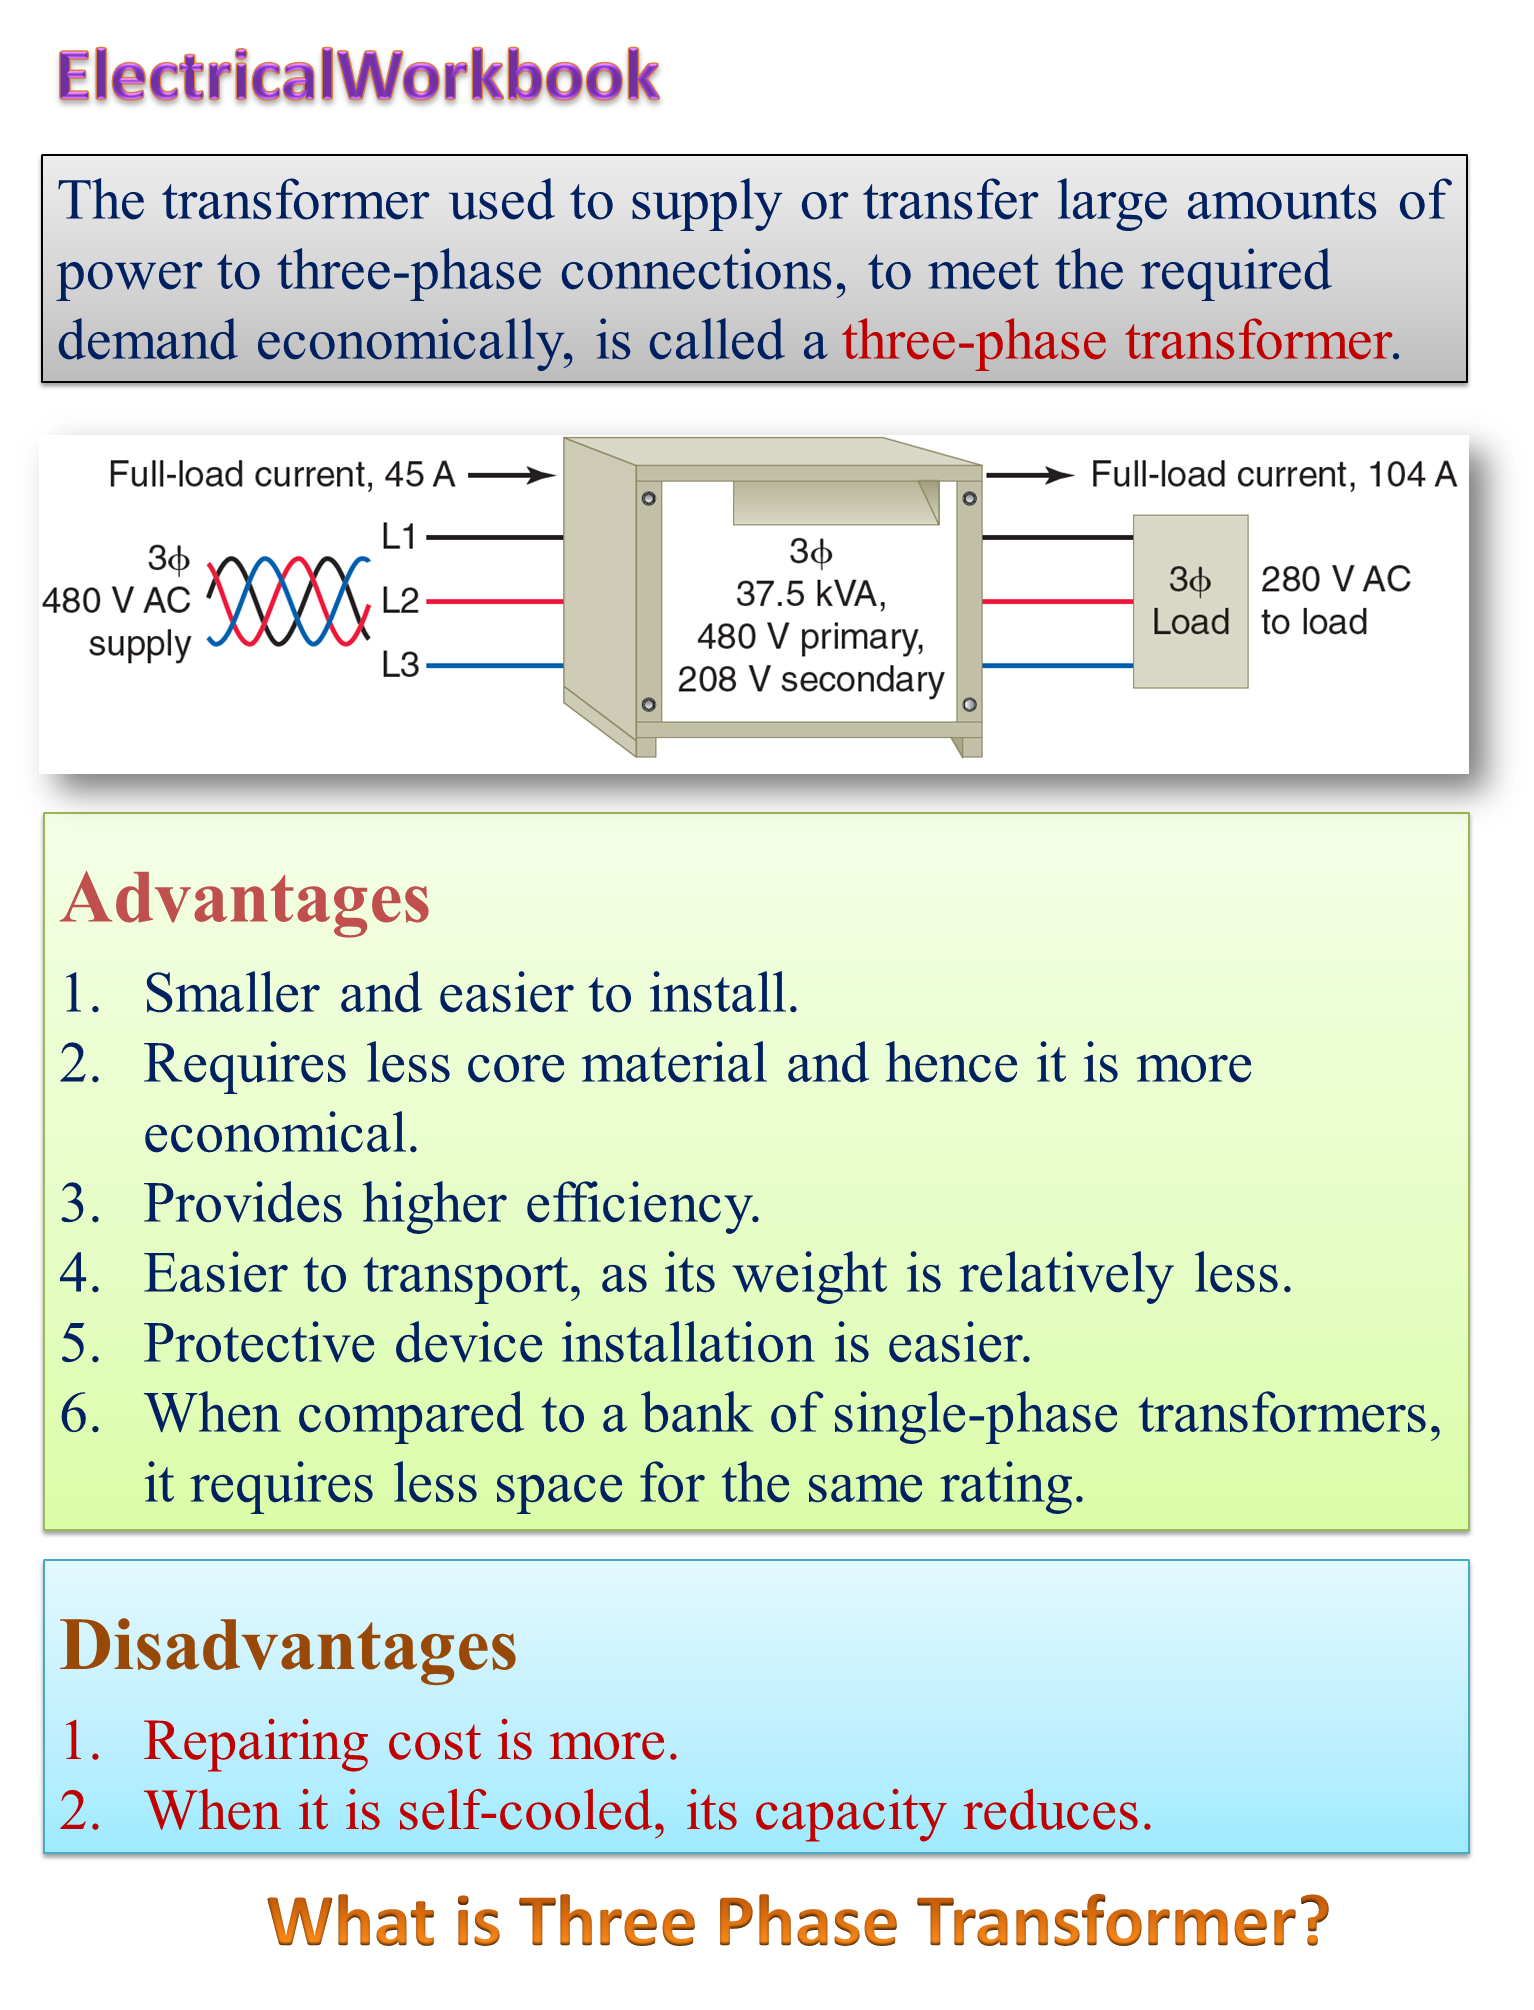 What is Three Phase Transformer